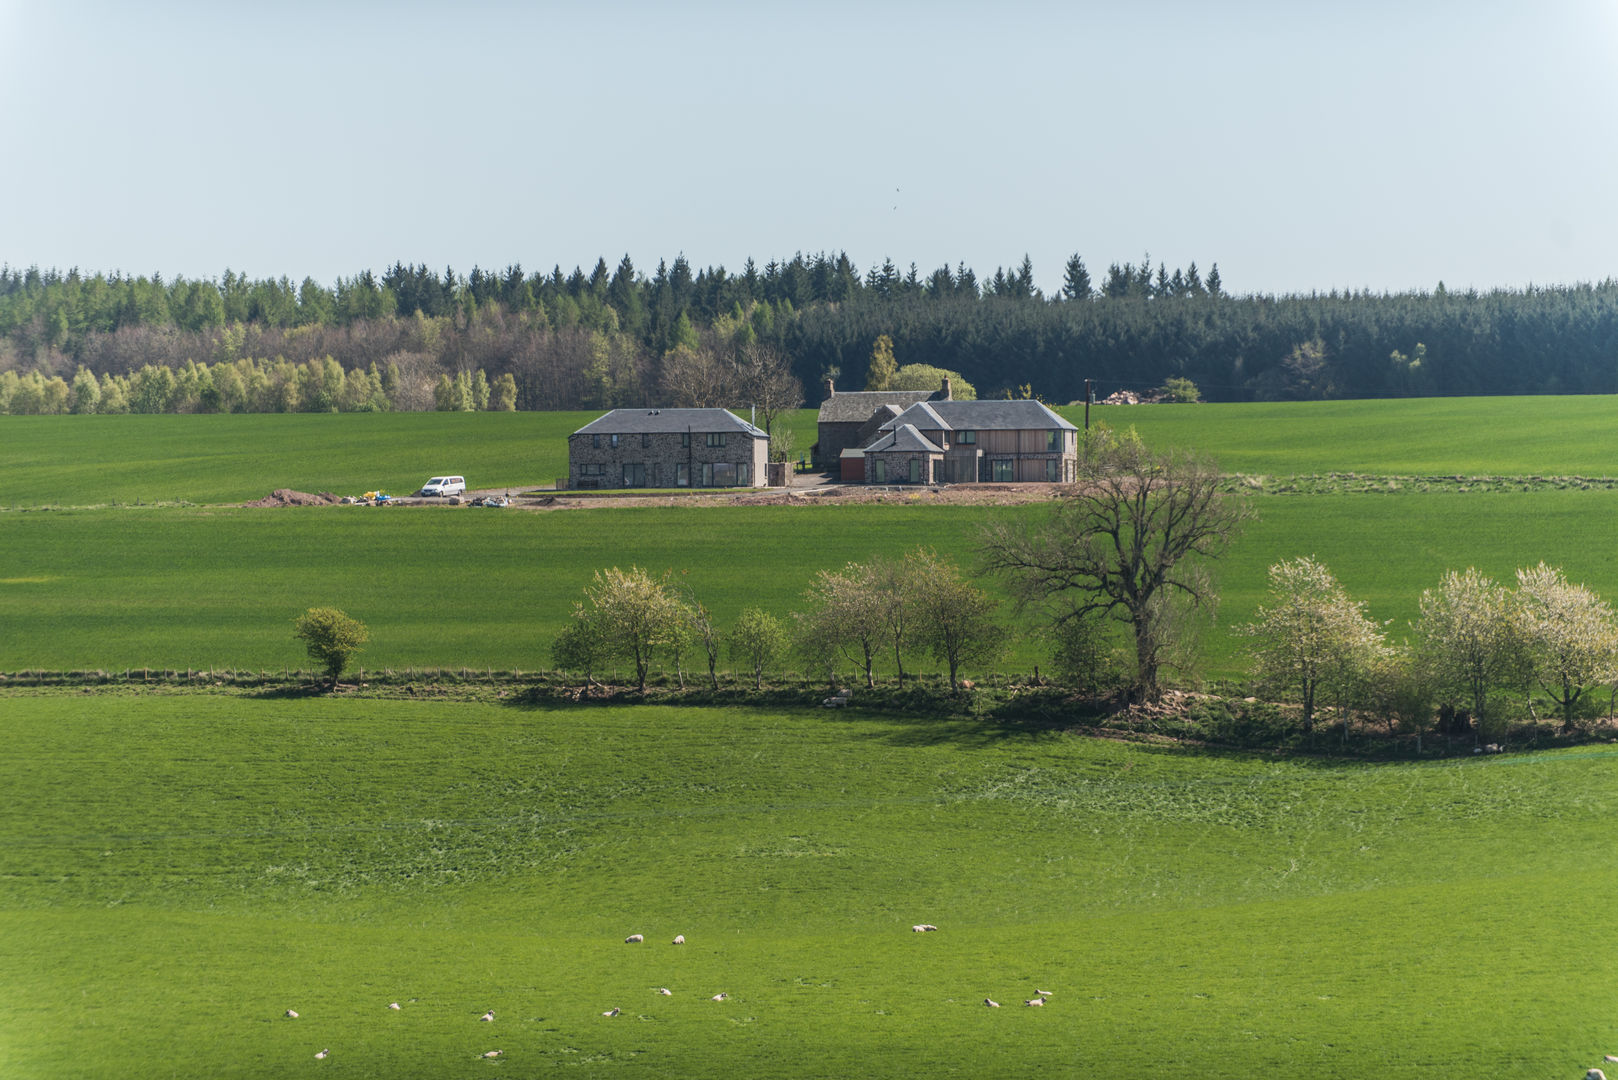 The development sits within the landscape as the former farm steading would Woodside Parker Kirk Architects Landelijke huizen rural,architecture,farm steading,development,new build,new house,stone house,landscape,countryside,view